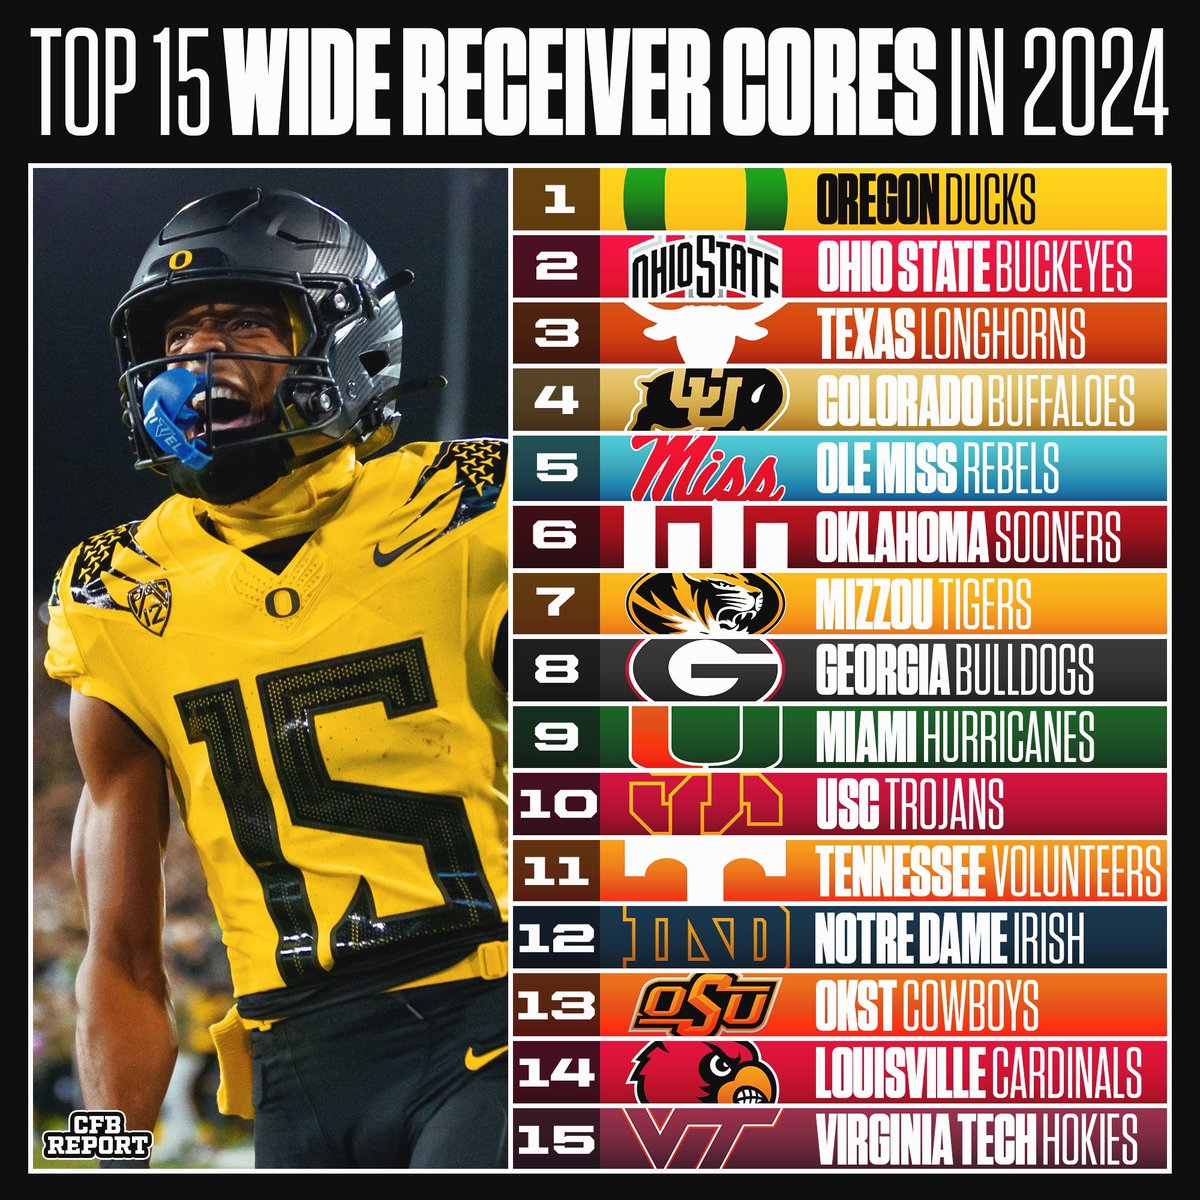 The Top 15 Wide Receiver Cores in College Football Next Season 🏈